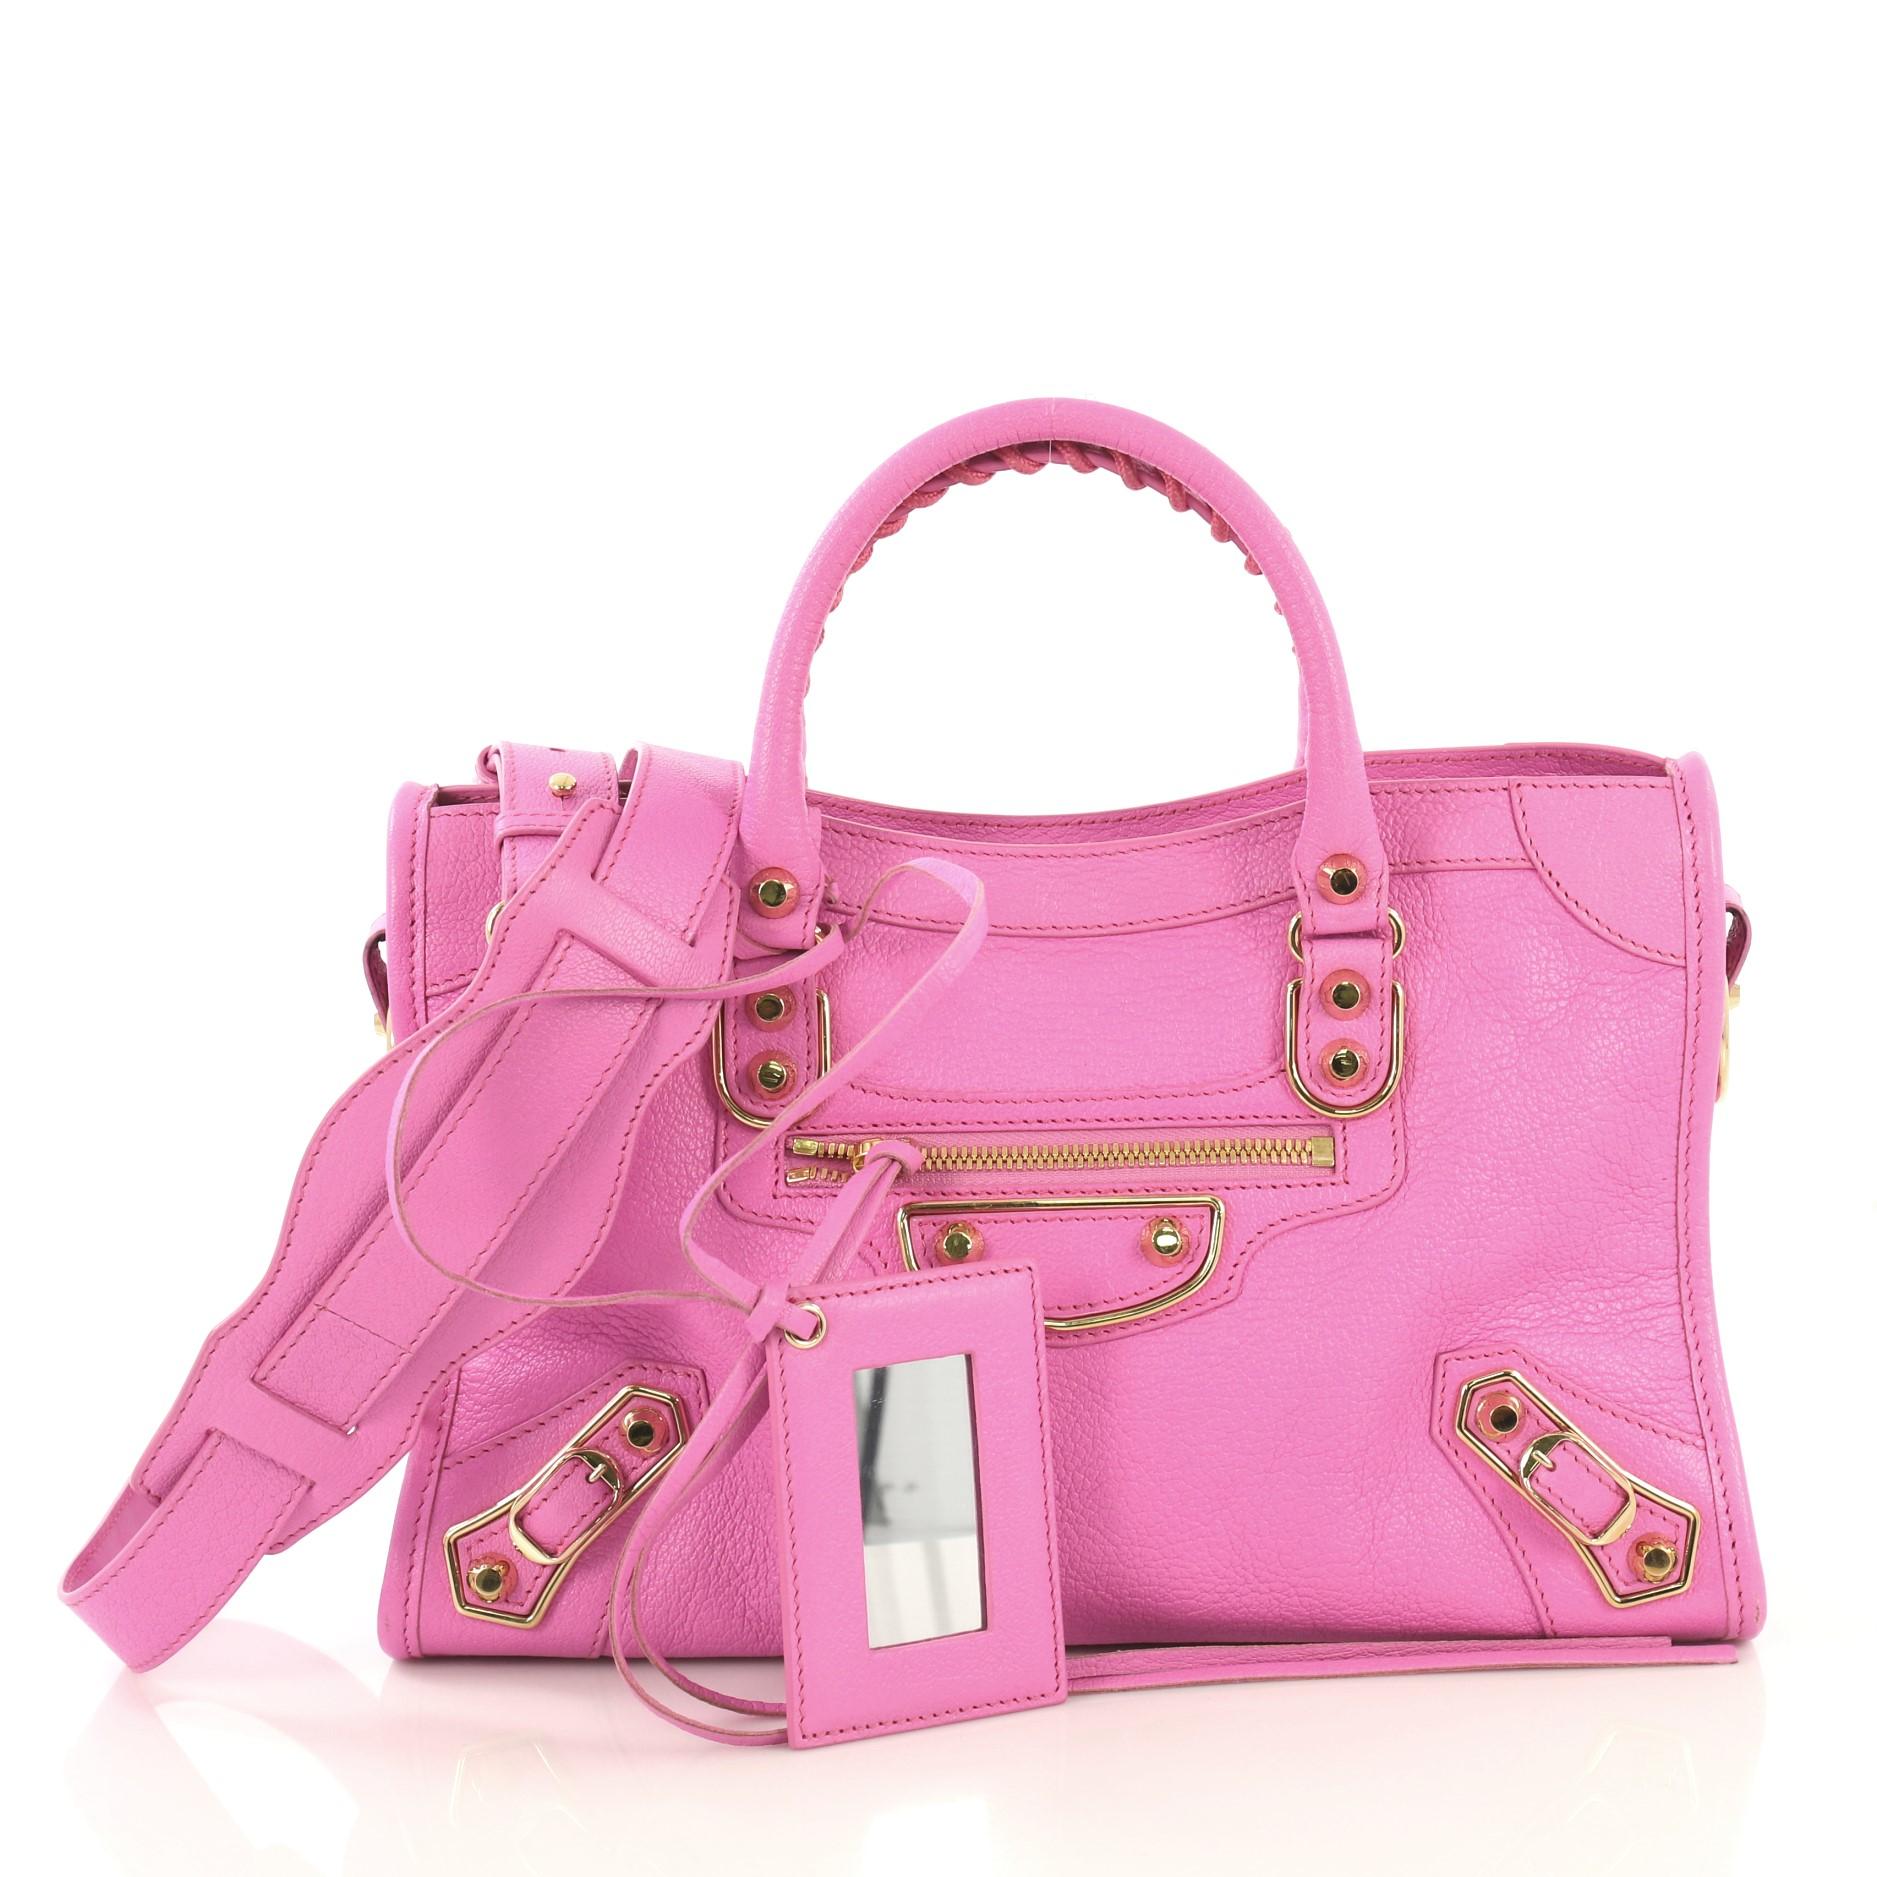 This Balenciaga City Classic Metallic Edge Bag Leather Small, crafted from pink leather, features dual braided woven handles, studs and buckle details, front zip pocket, and gold-tone hardware. Its top zip closure opens to a black fabric interior